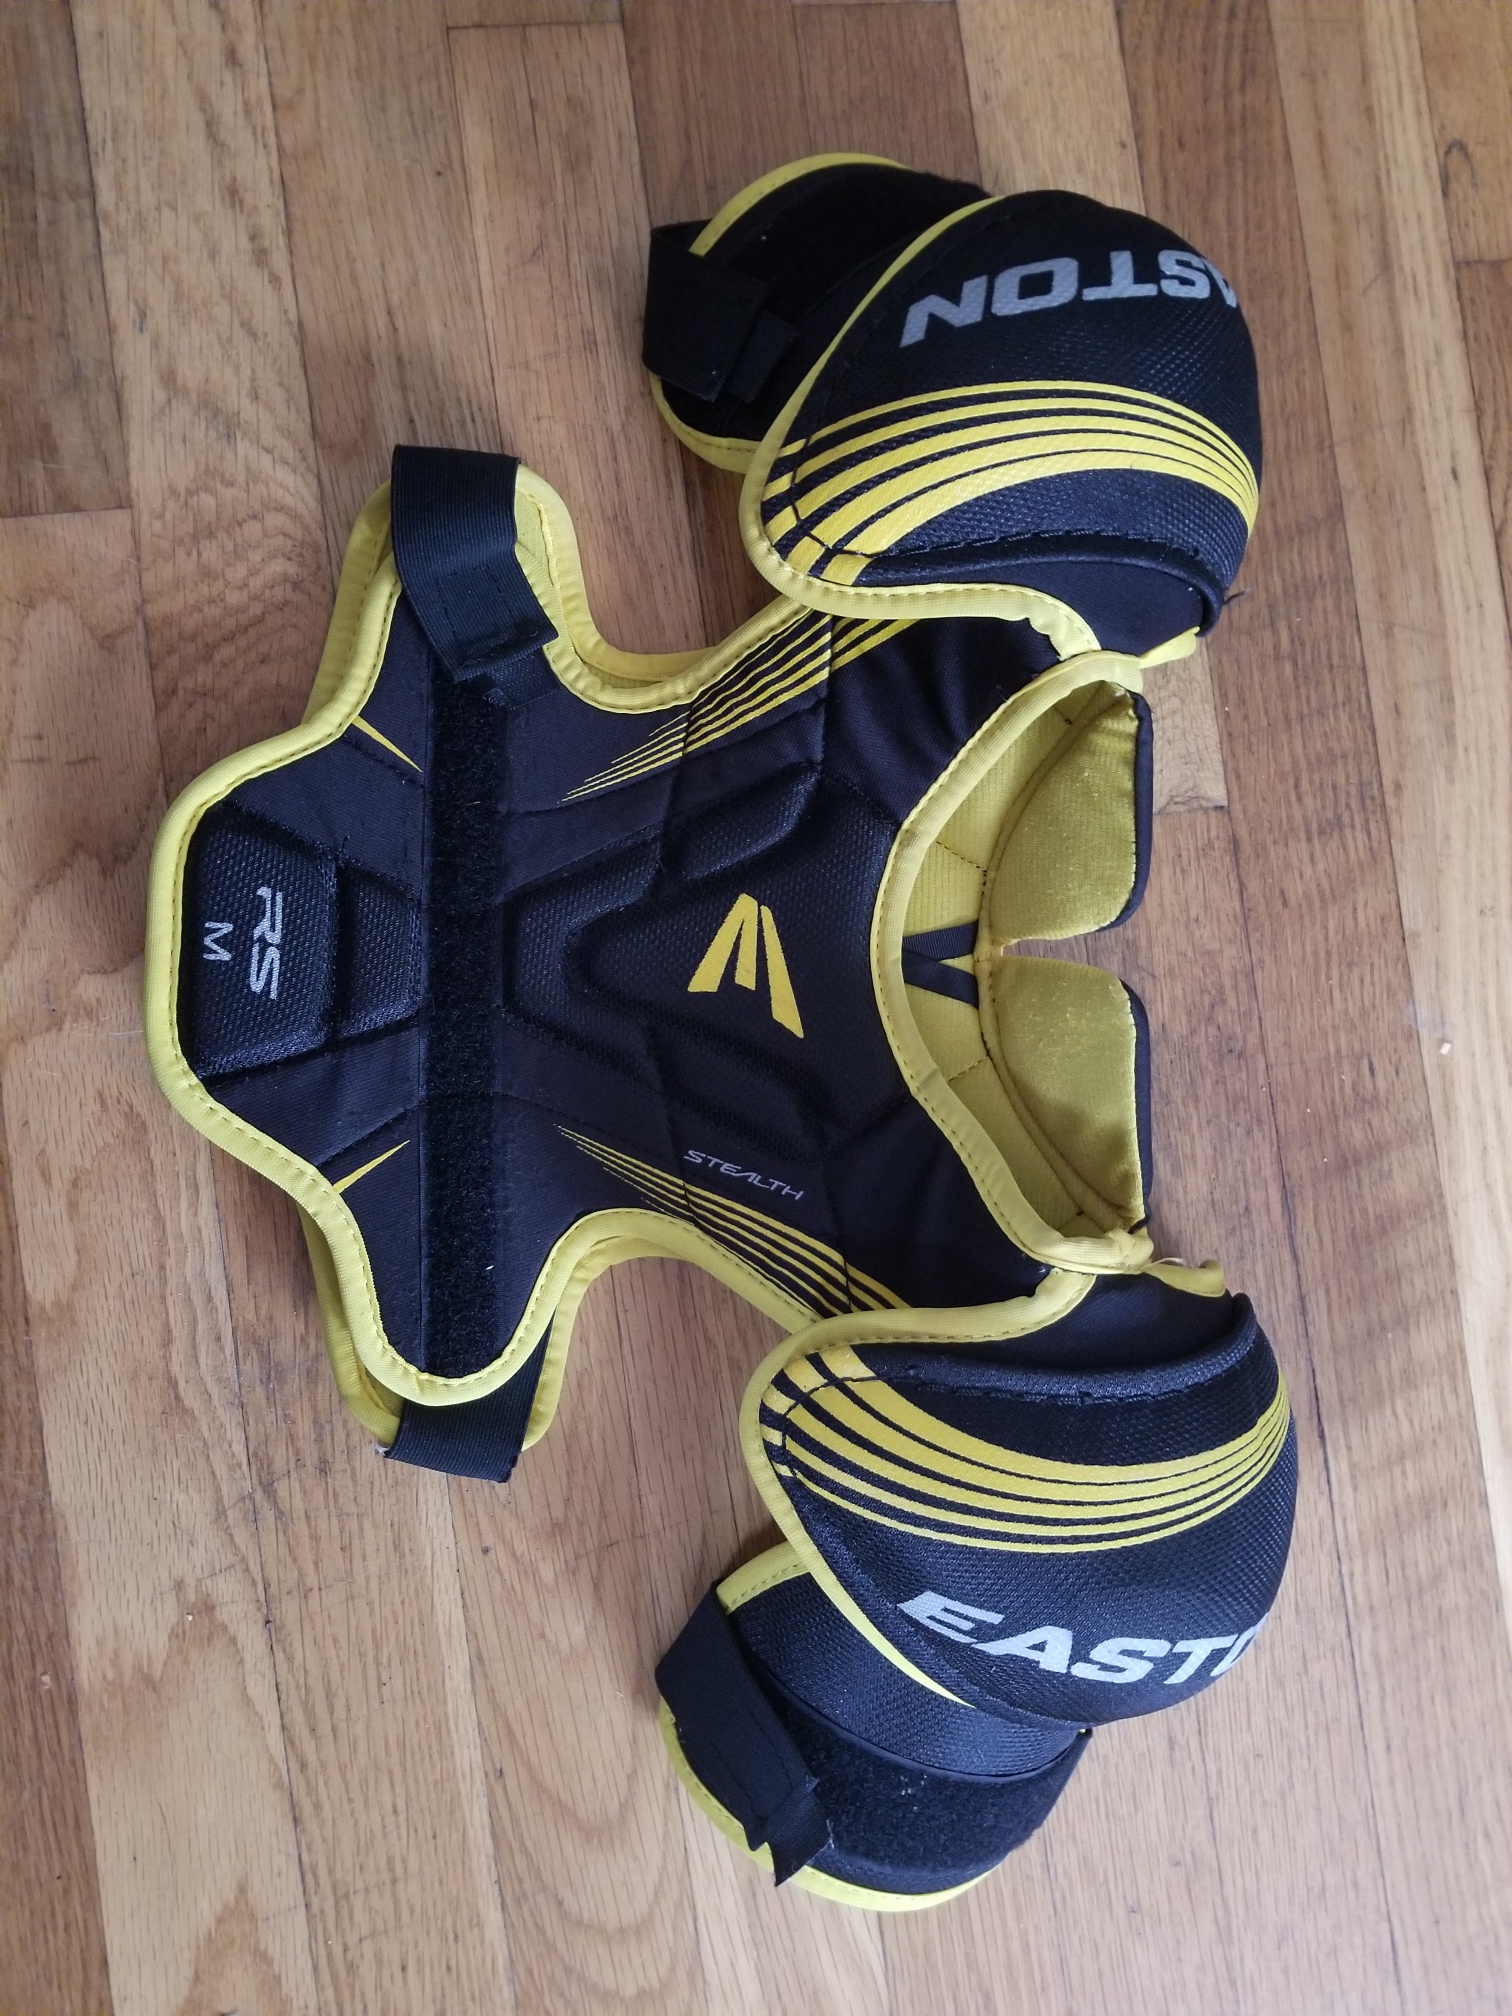 Youth Used Medium Easton Stealth Shoulder Pads